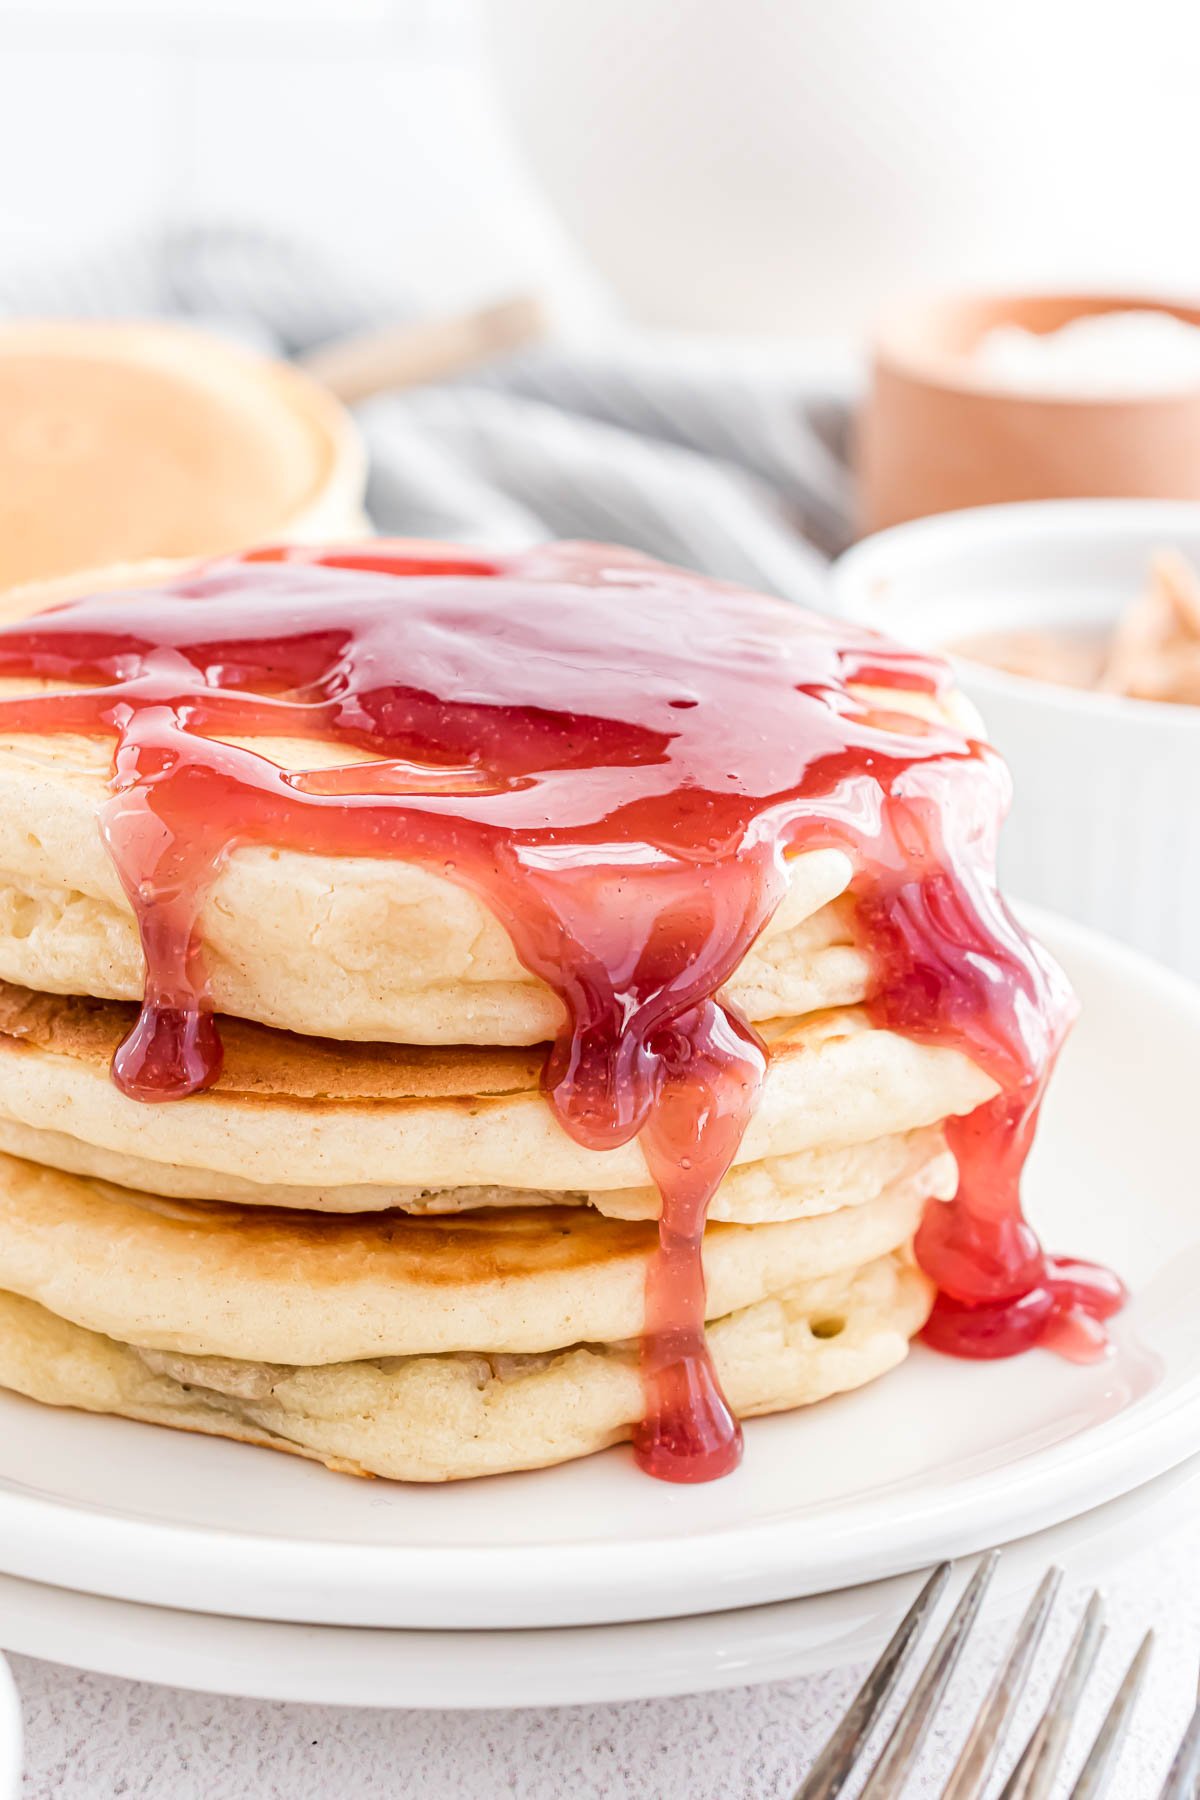 Stack of pancakes with jelly syrup.